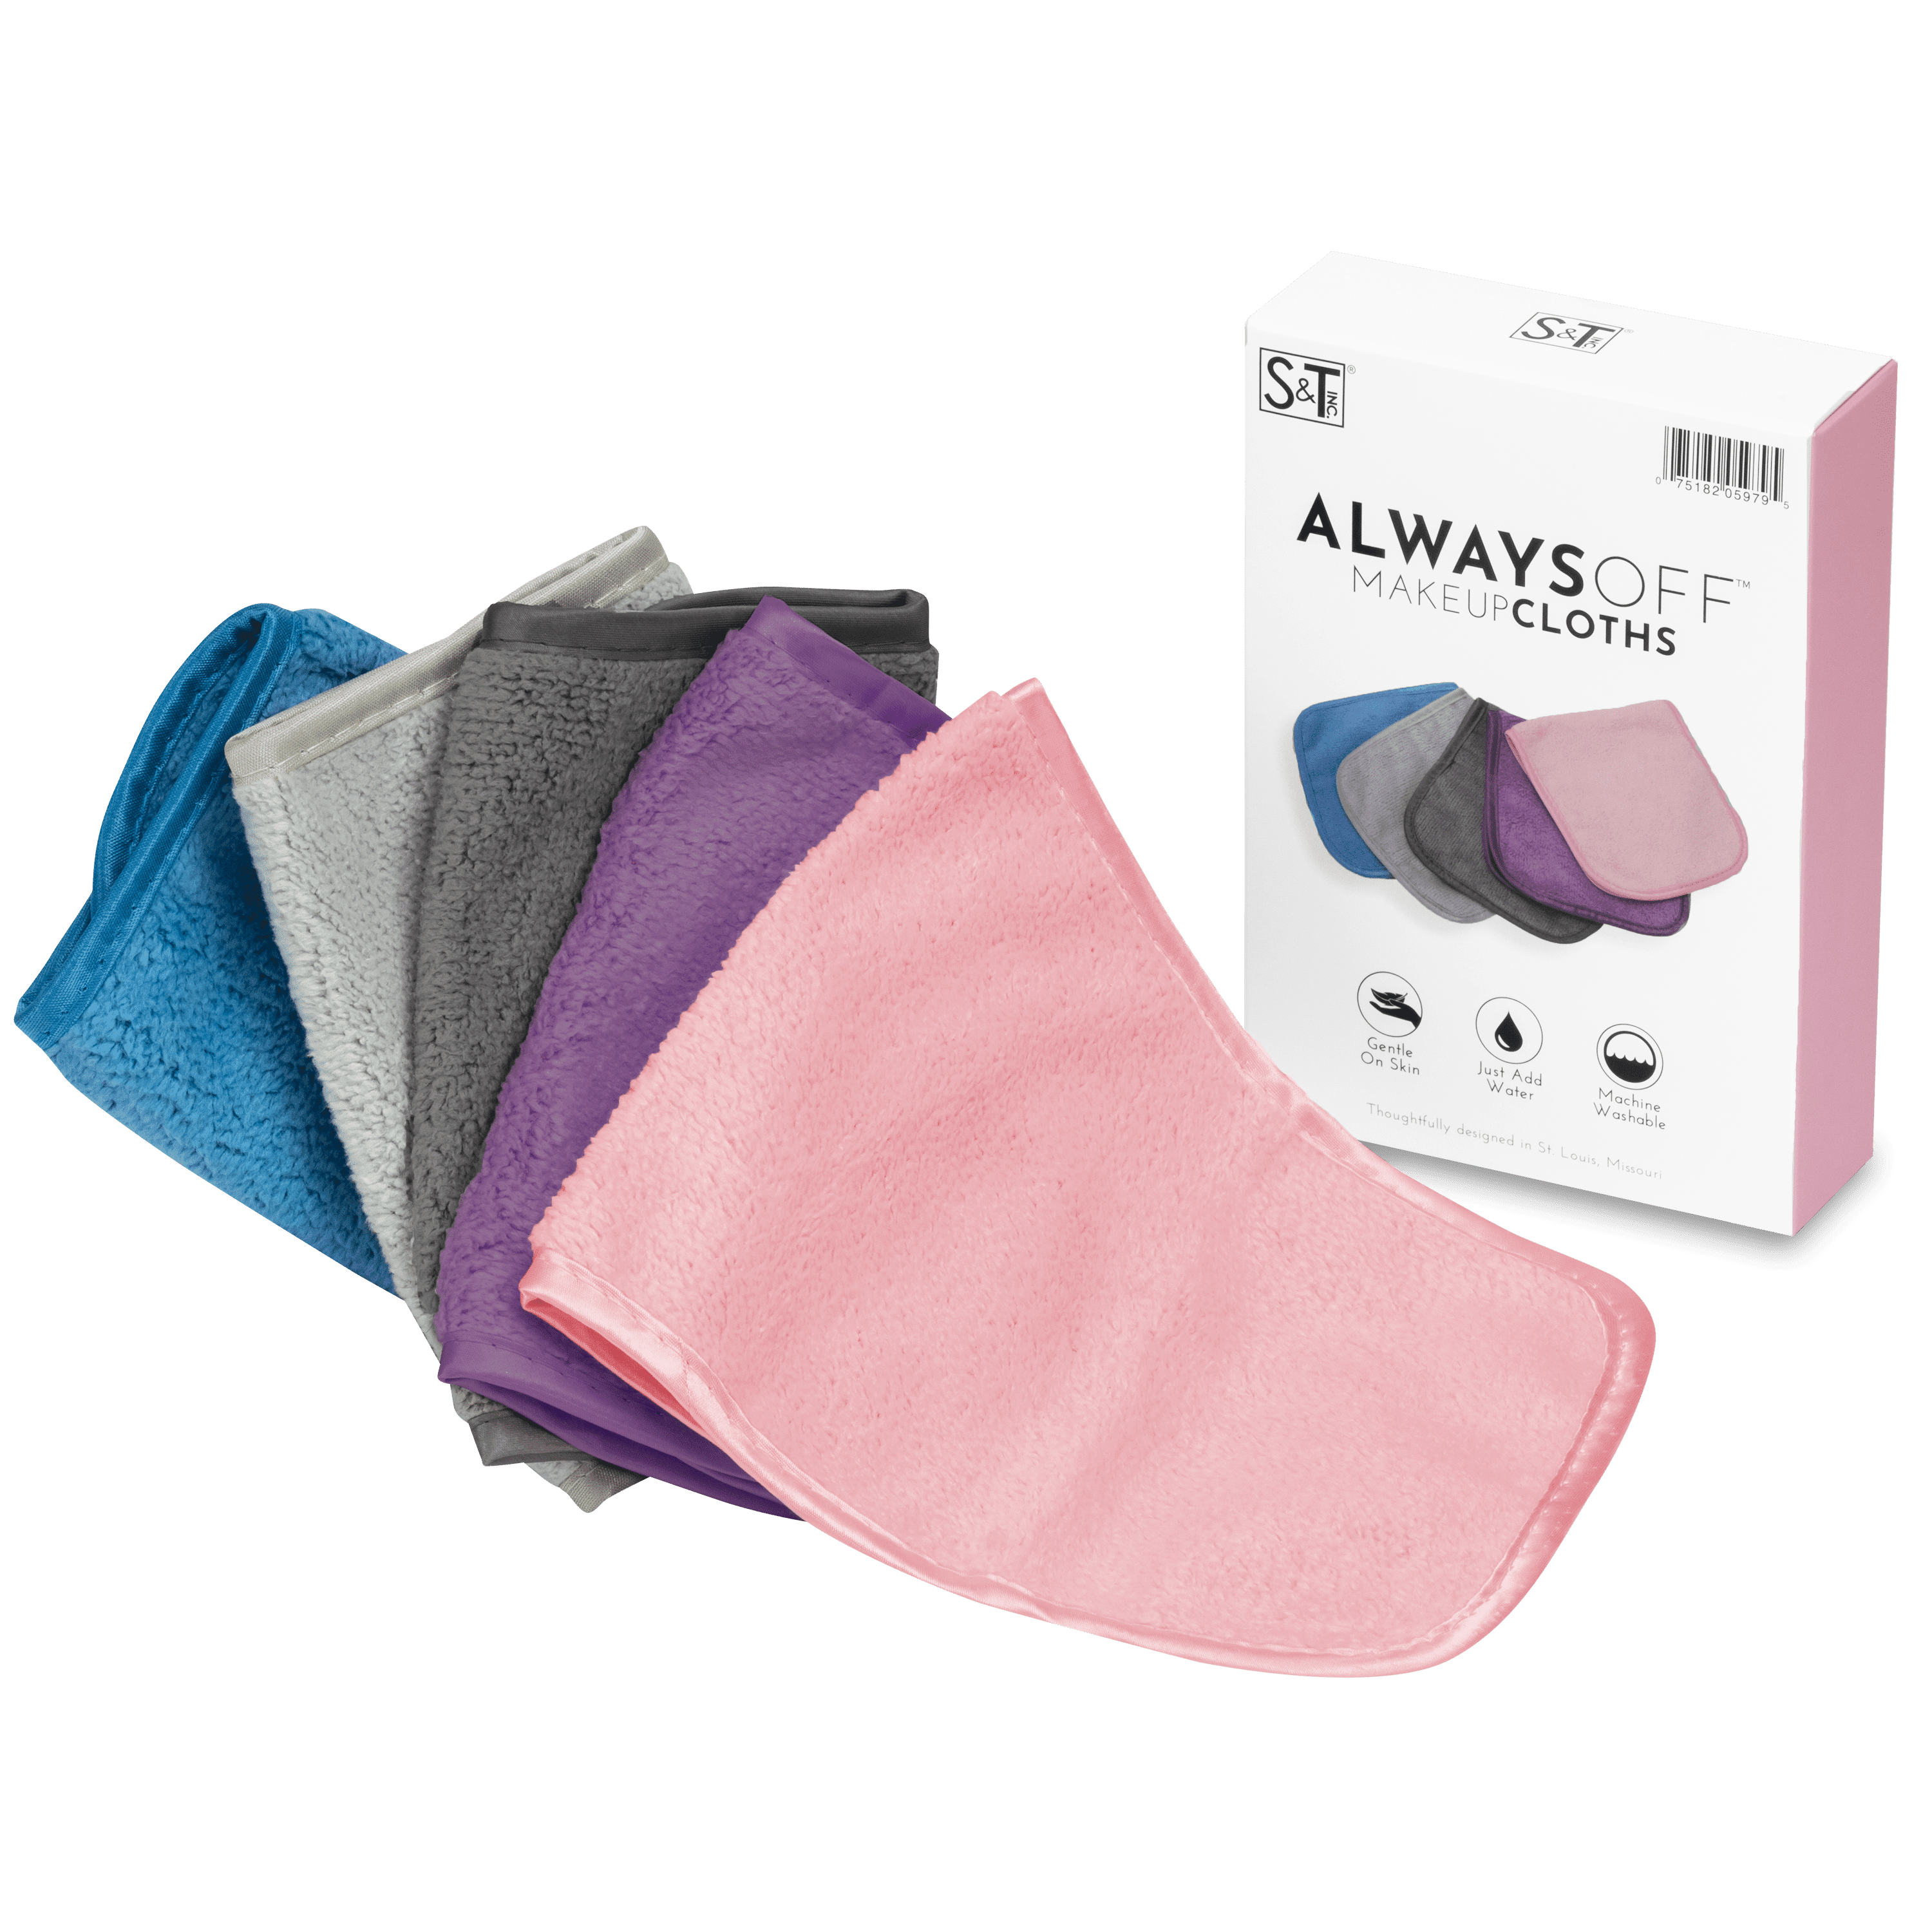 Washable up to 95°C Make-up remover cloths washable FABCARE Makeup Remover Cloth Microfibre Microfibre face cloths 4 pieces Integrated make-up removal glove - DERMATEST VERY GOOD 